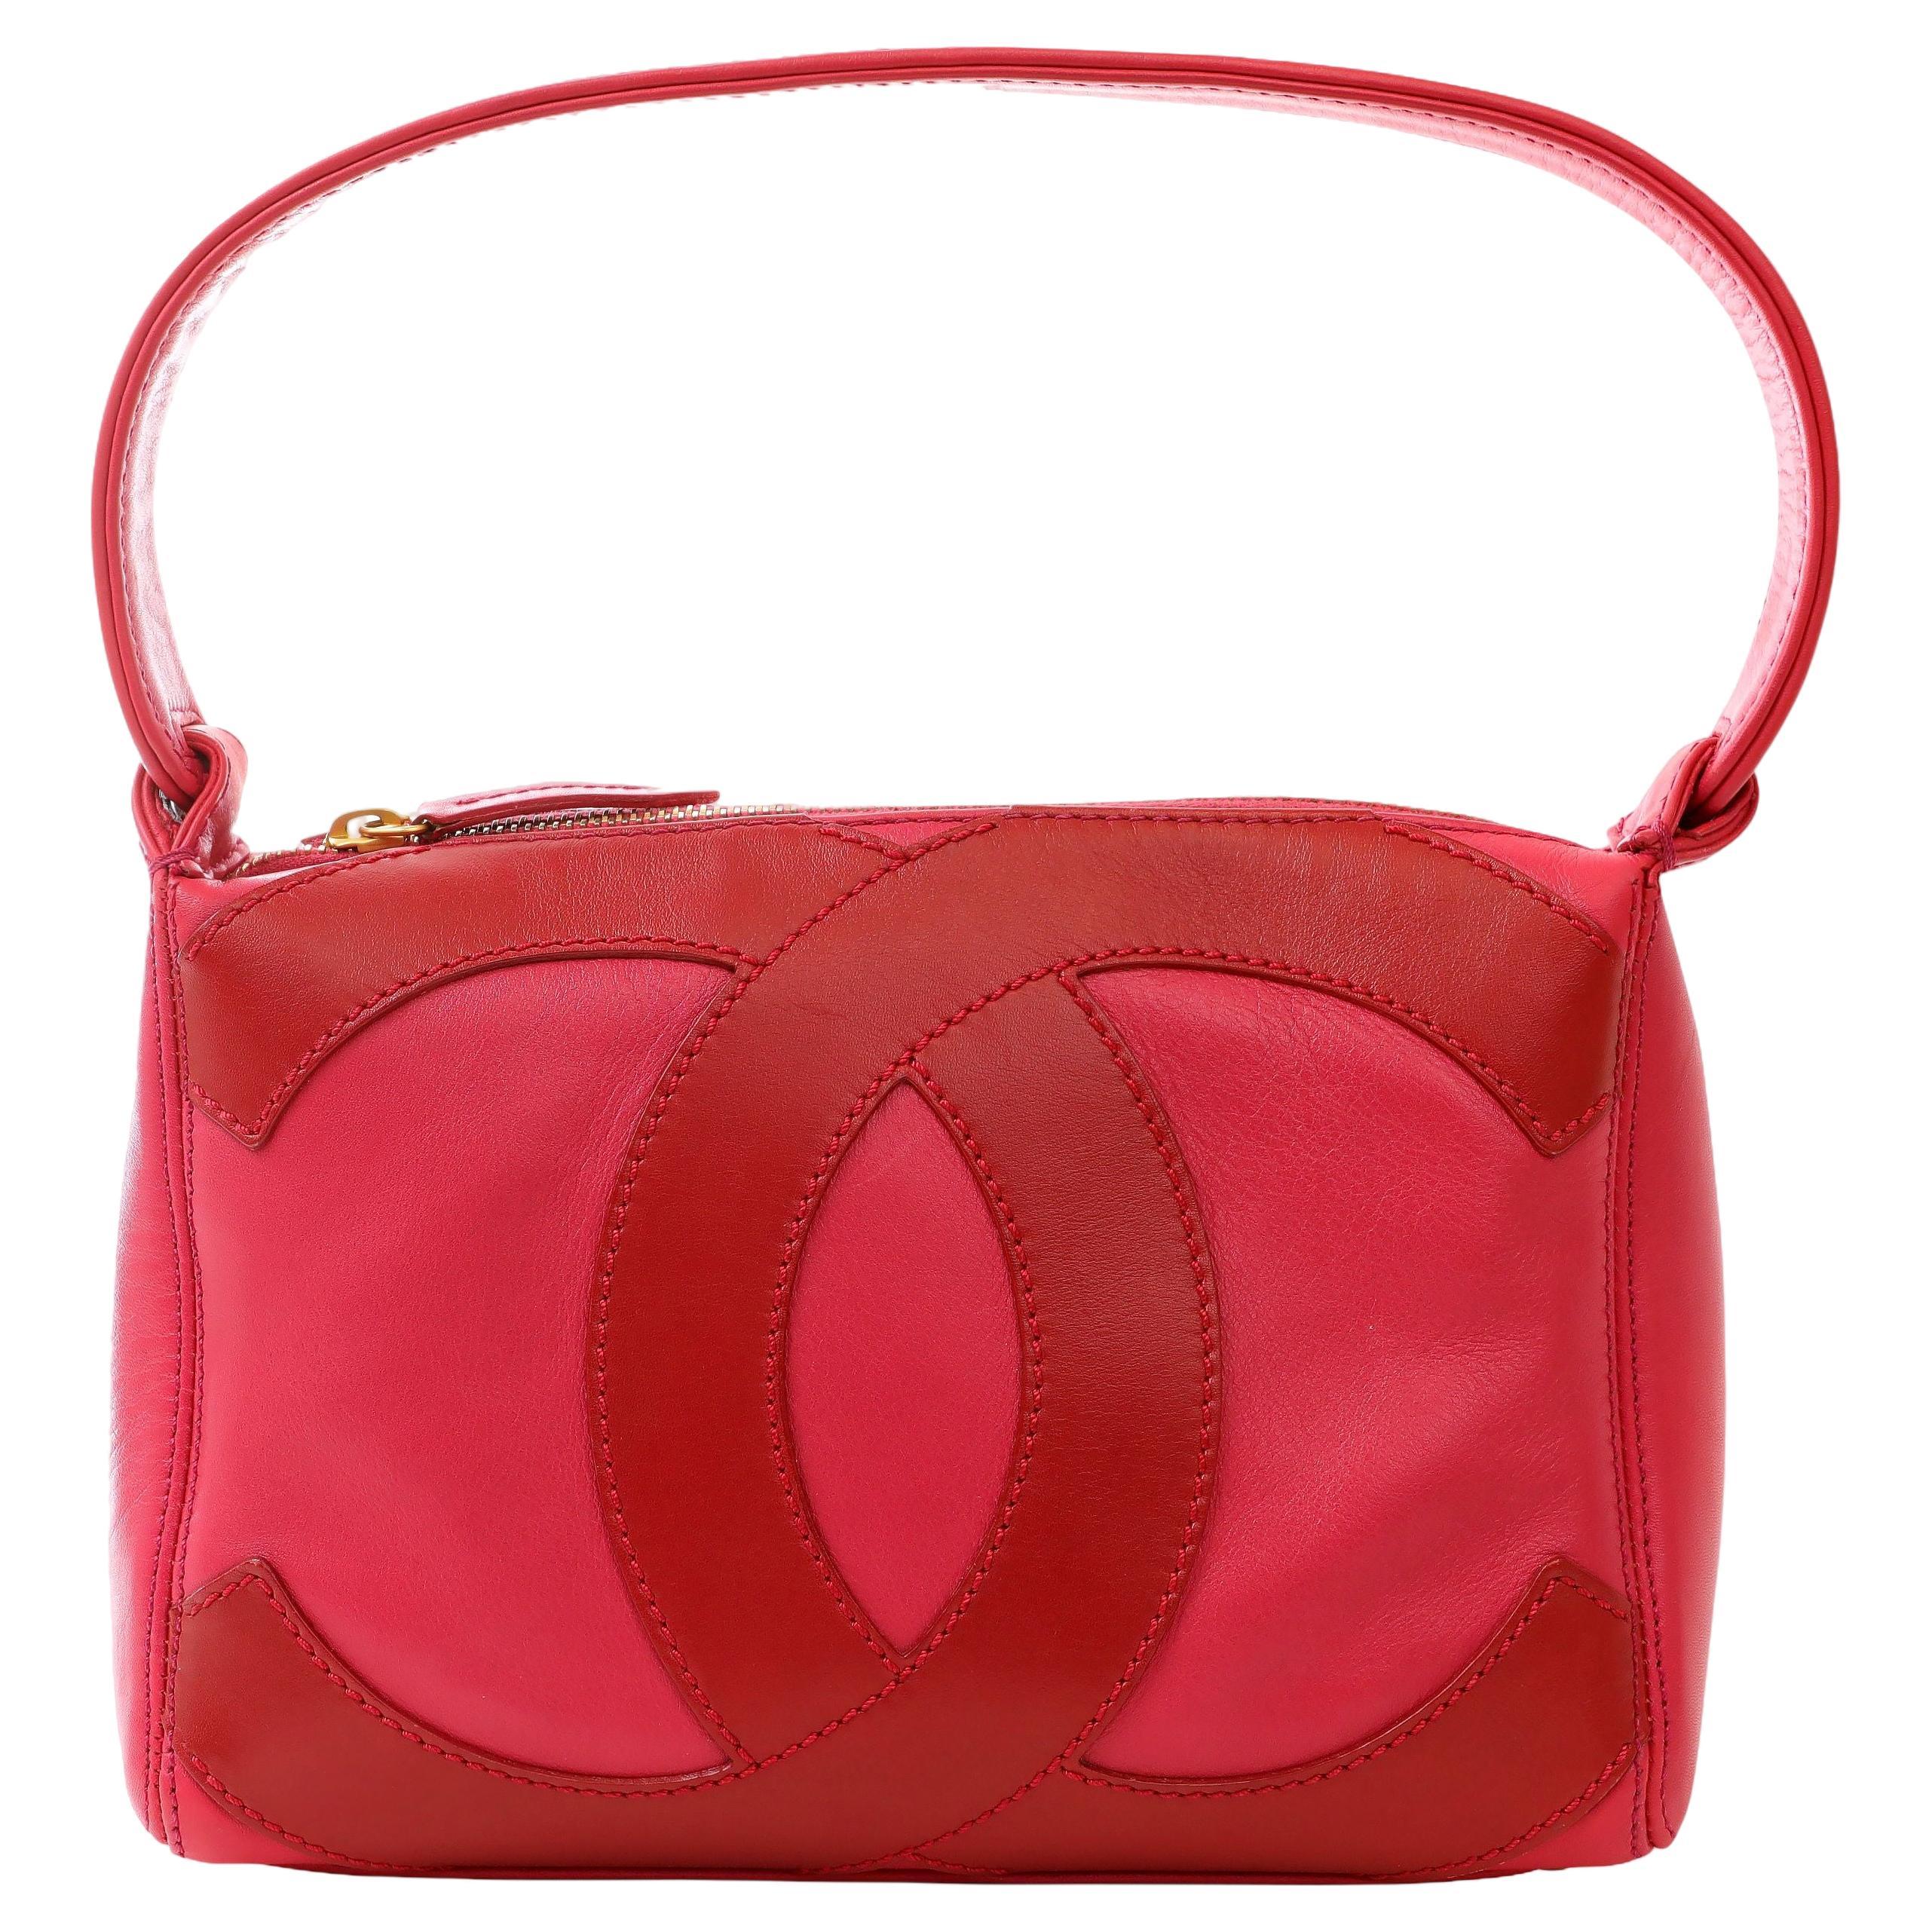 Coco Chanel Bag Pink - 21 For Sale on 1stDibs